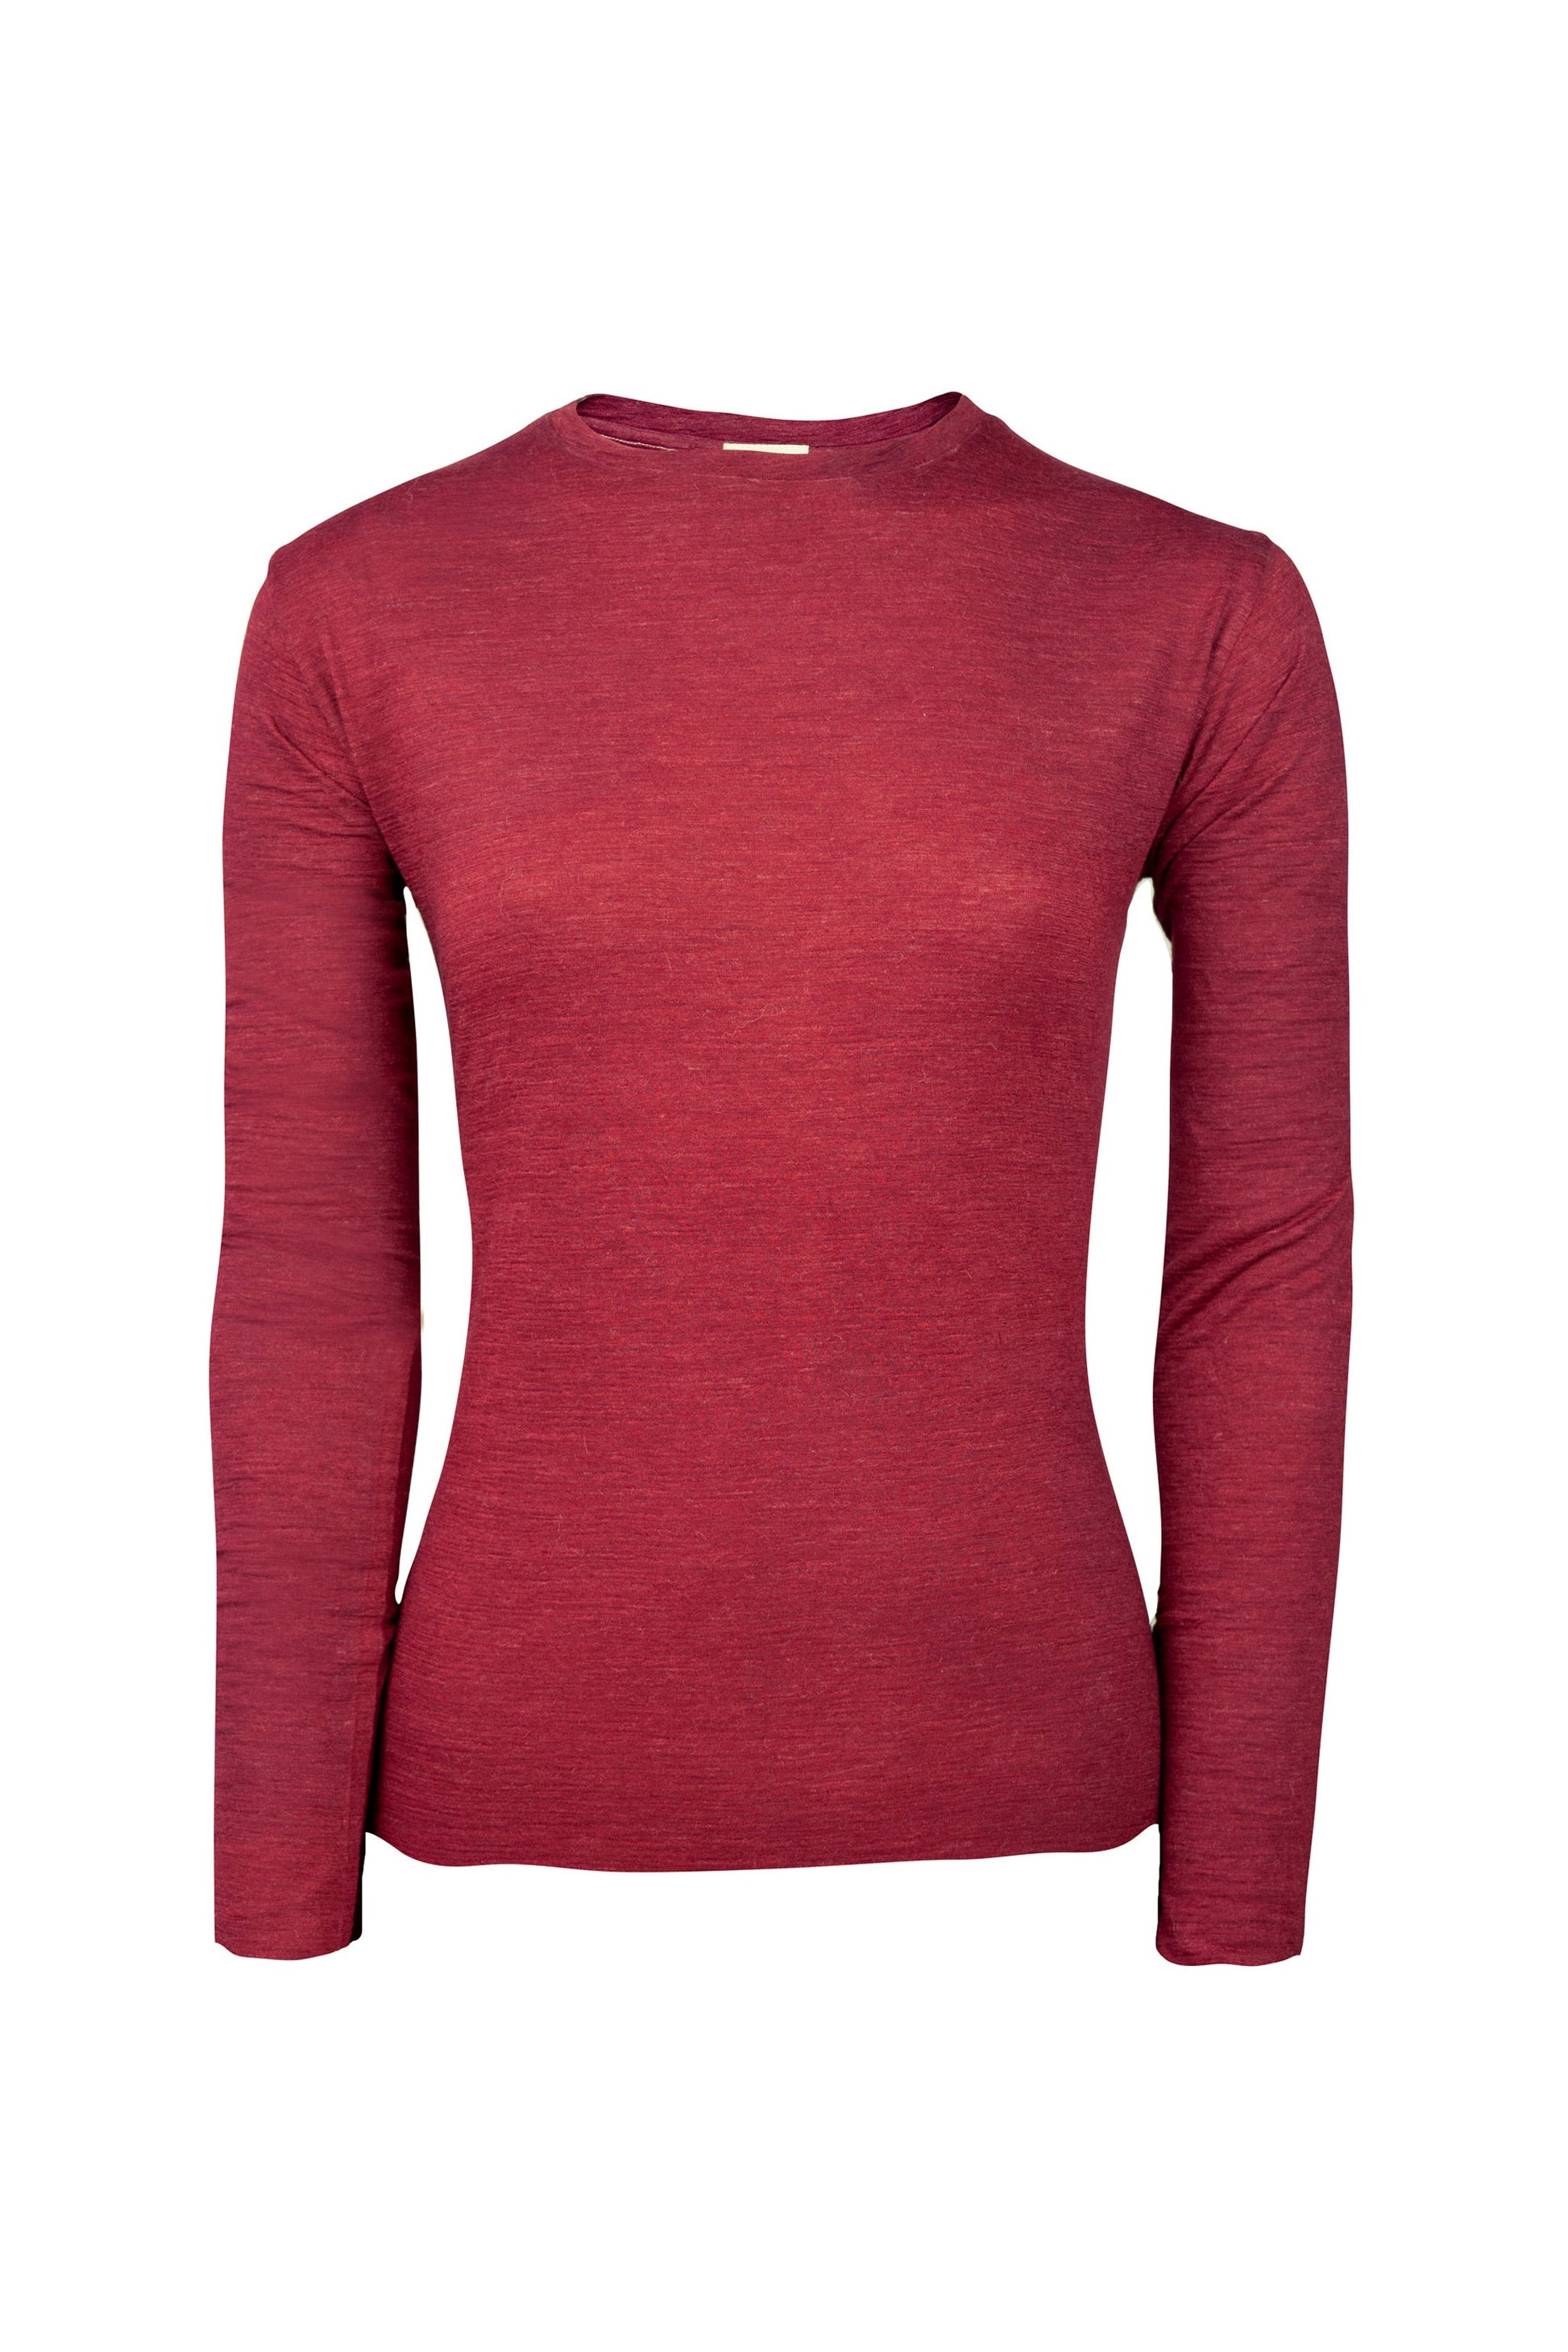 Women's Alpaca Wool Long Sleeve Base Layer: 110 Ultralight color Natural Red